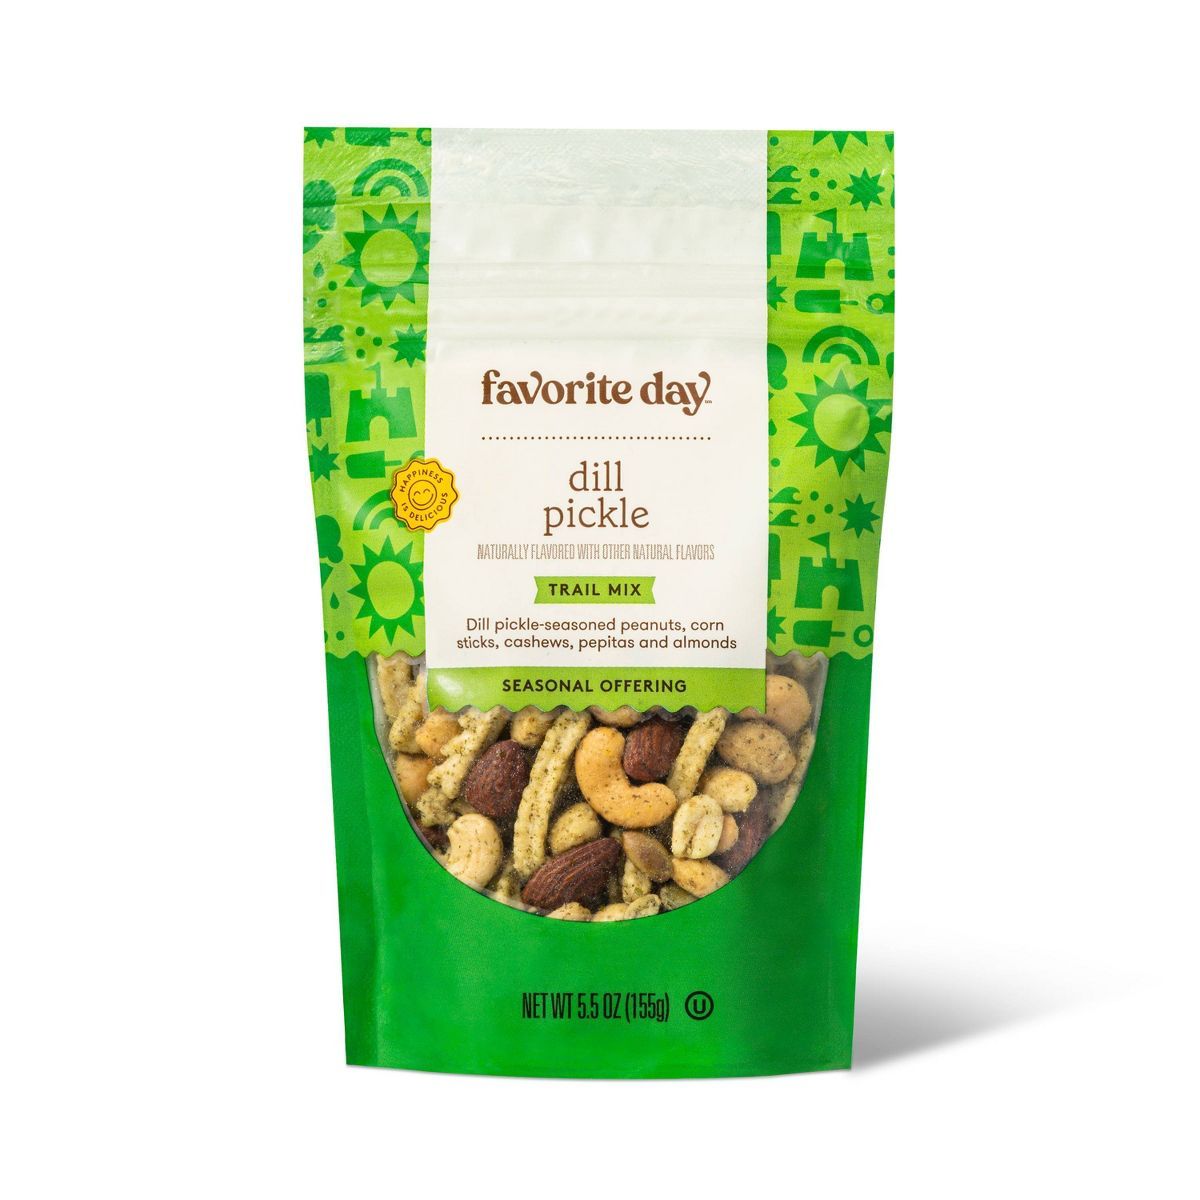 Dill Pickle Trail Mix - 5.5oz - Favorite Day™ | Target